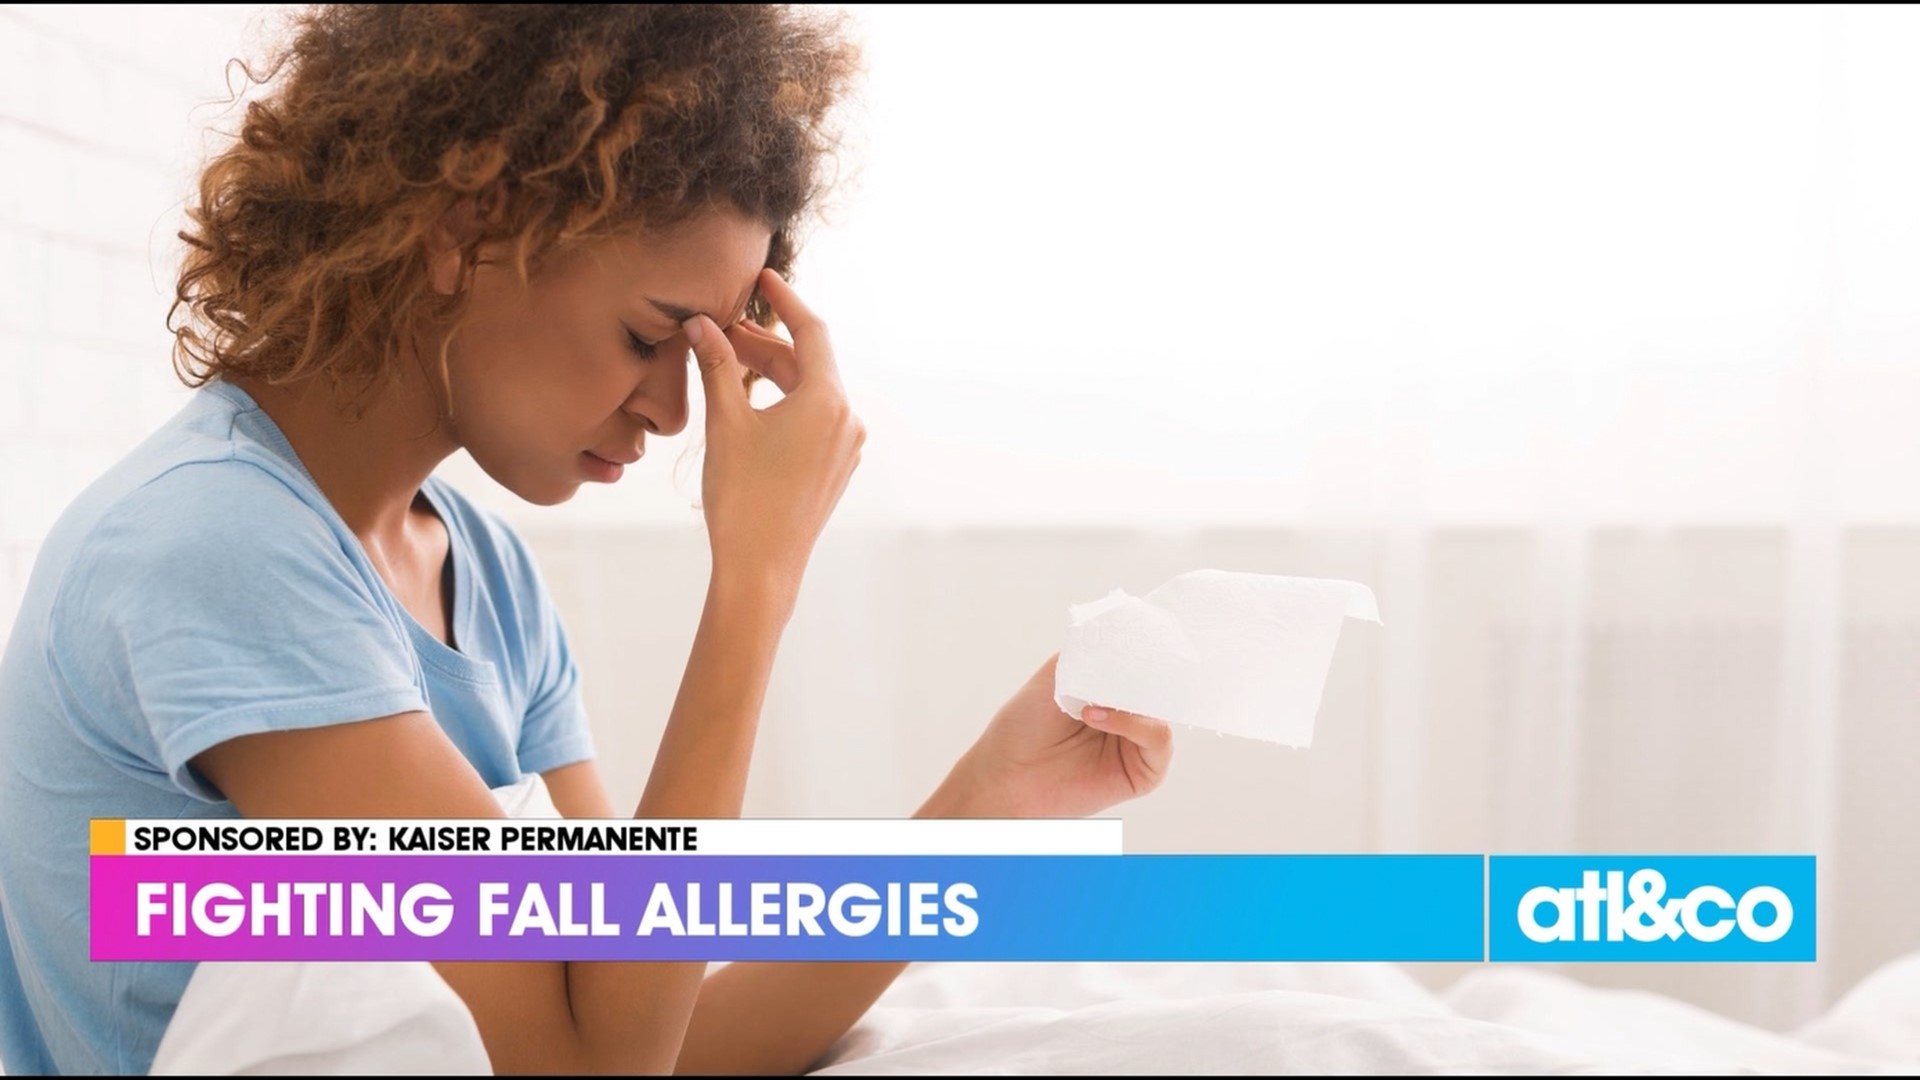 Get helpful tips to fight fall allergies from Kaiser Permanente.